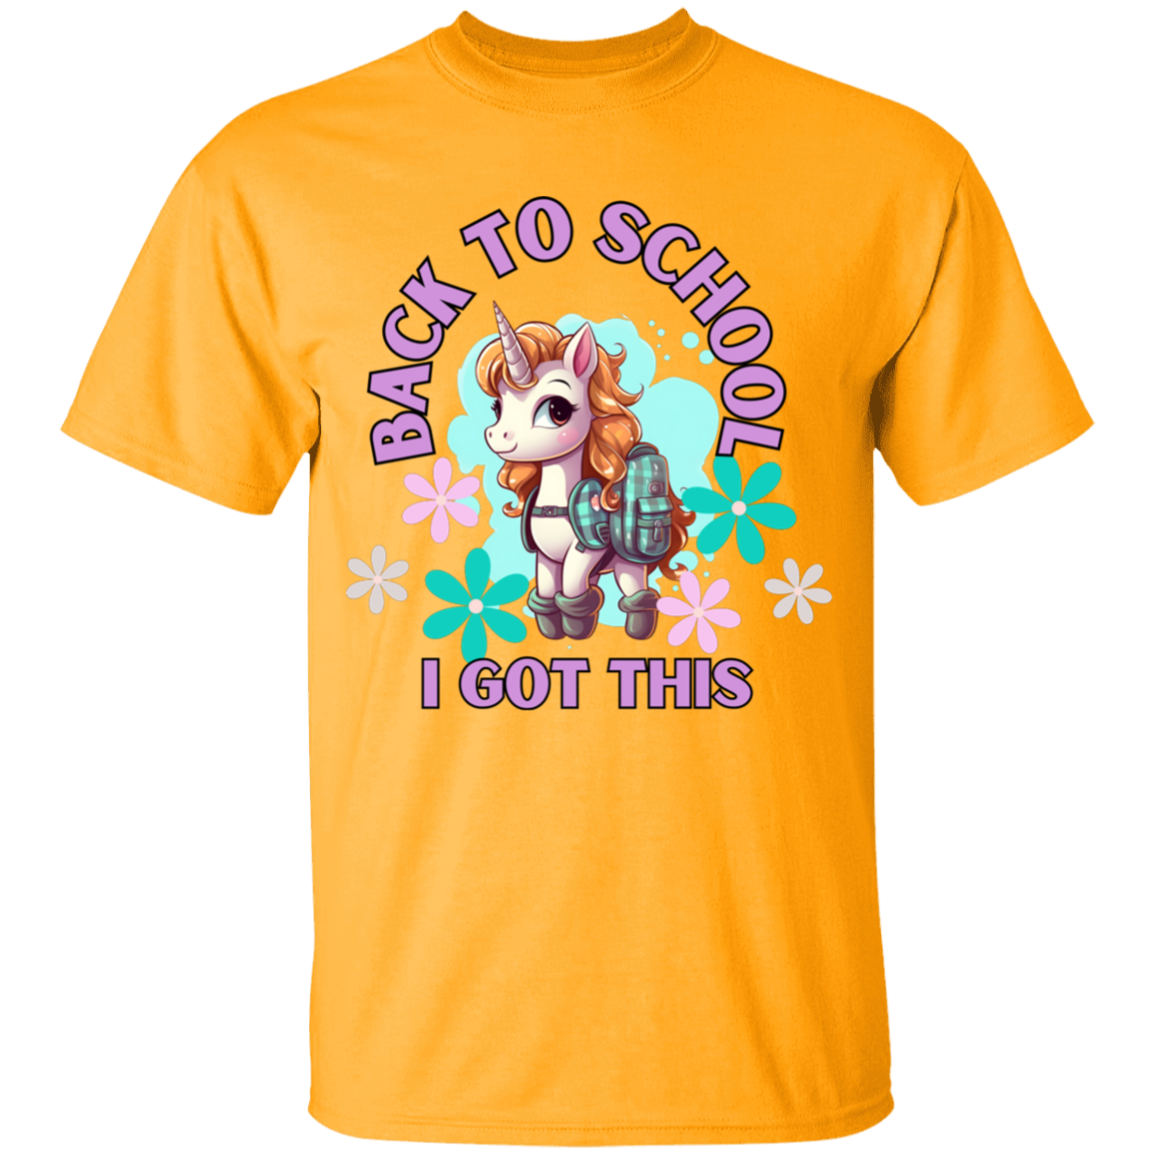 Back to School, I Got This - Youth T-Shirt with Ready-for-School Unicorn